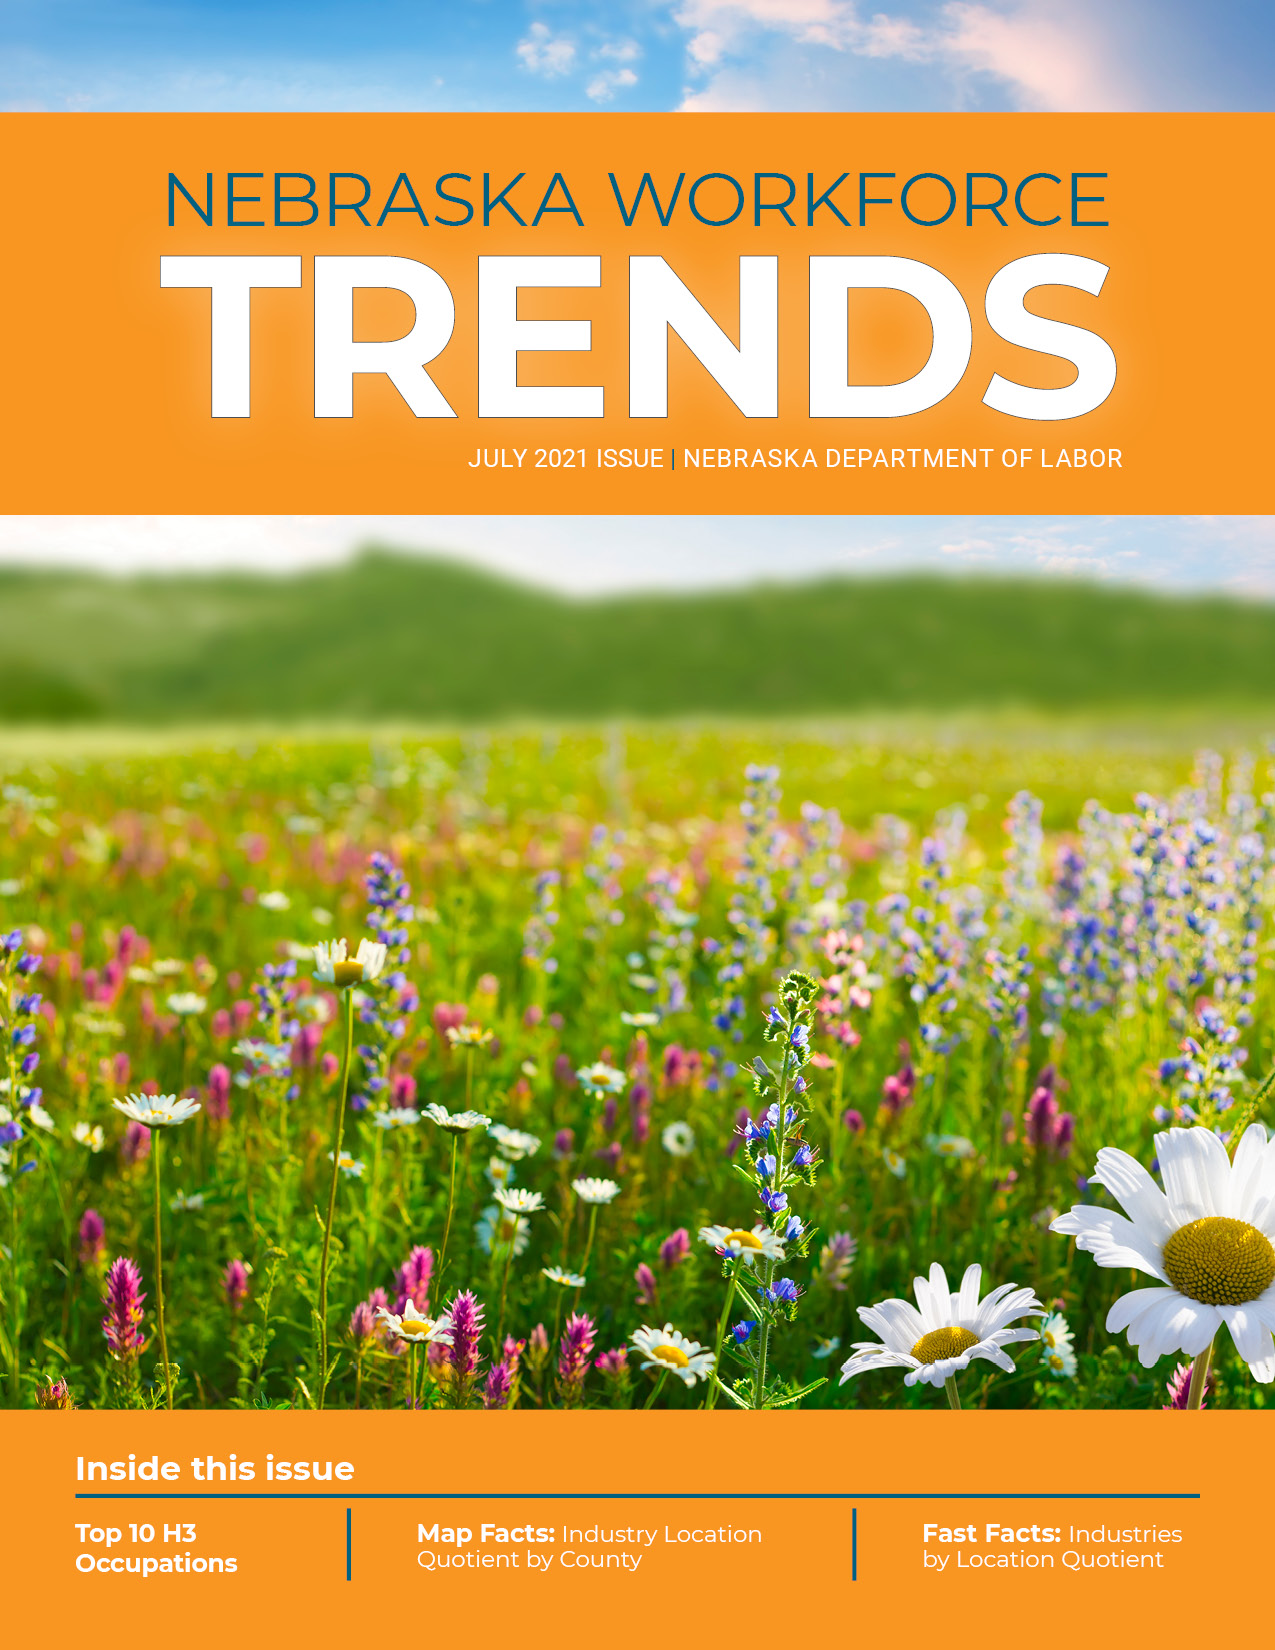 Thumbnail for Trends magazine cover